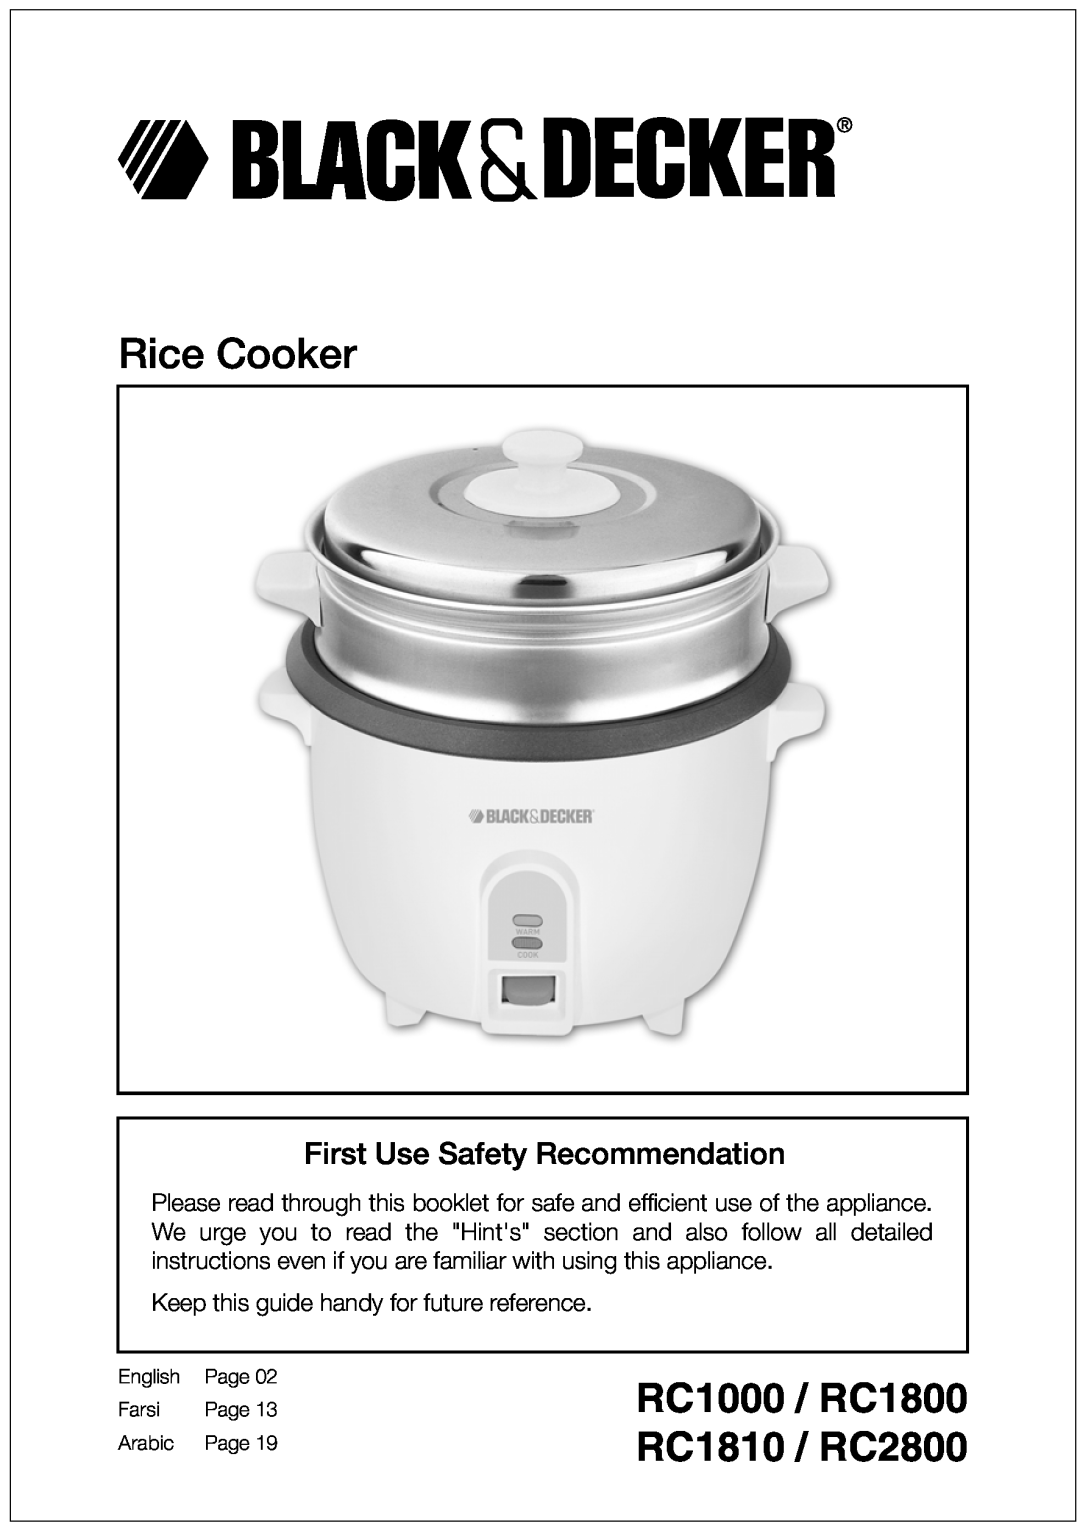 Black & Decker manual Rice Cooker, RC1000 / RC1800 RC1810 / RC2800, First Use Safety Recommendation, English, Page 